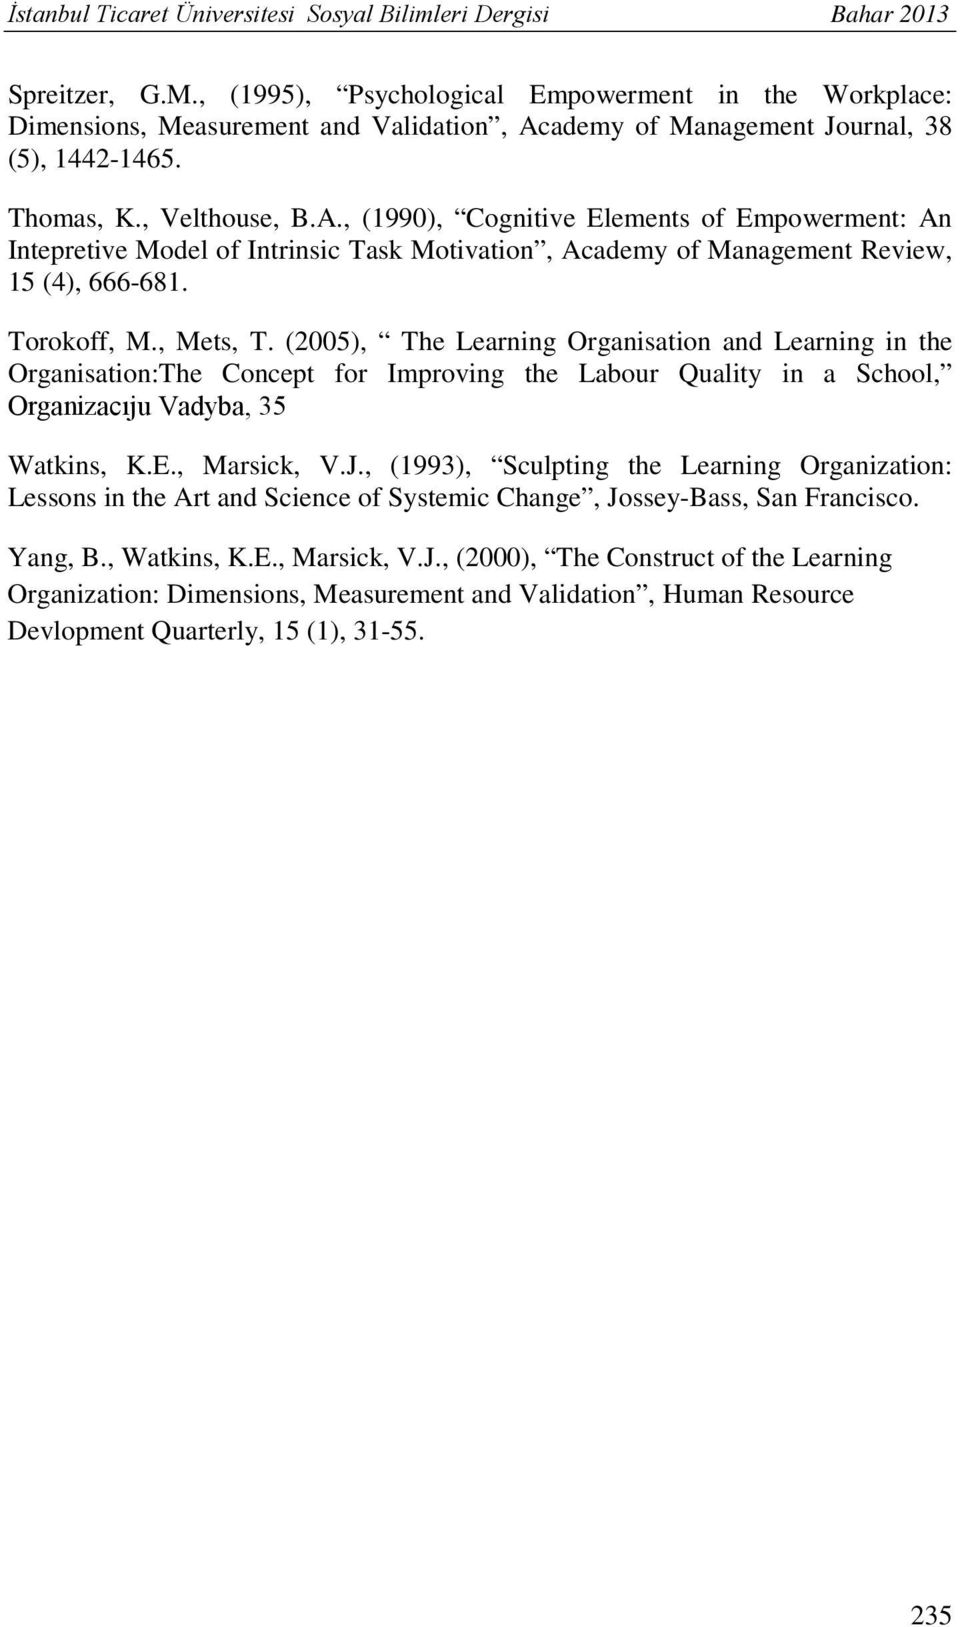 ademy of Management Journal, 38 (5), 1442-1465. Thomas, K., Velthouse, B.A.